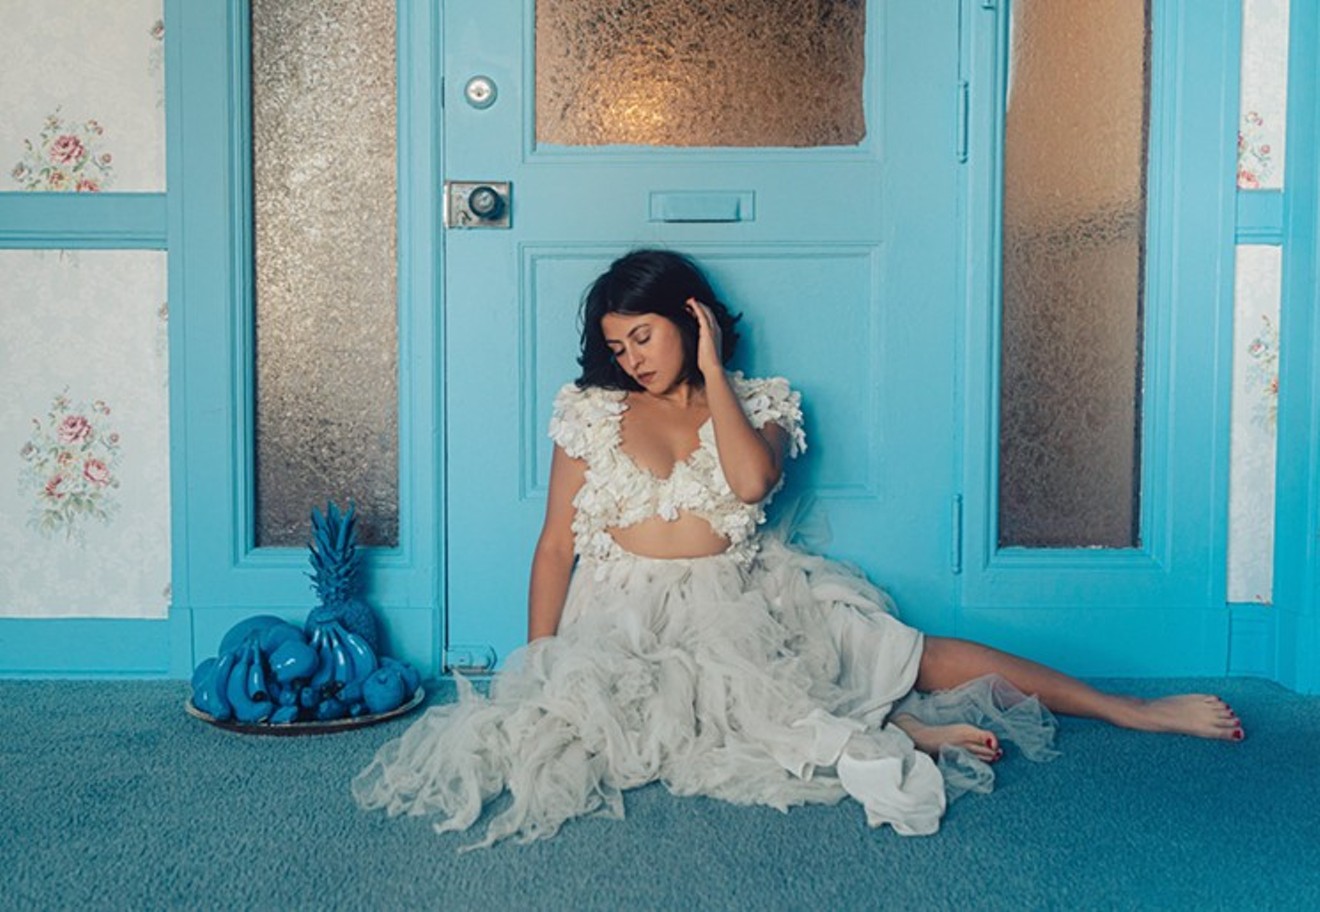 Singer Talia Roya returned in September with a new single, "Bite My Tongue."